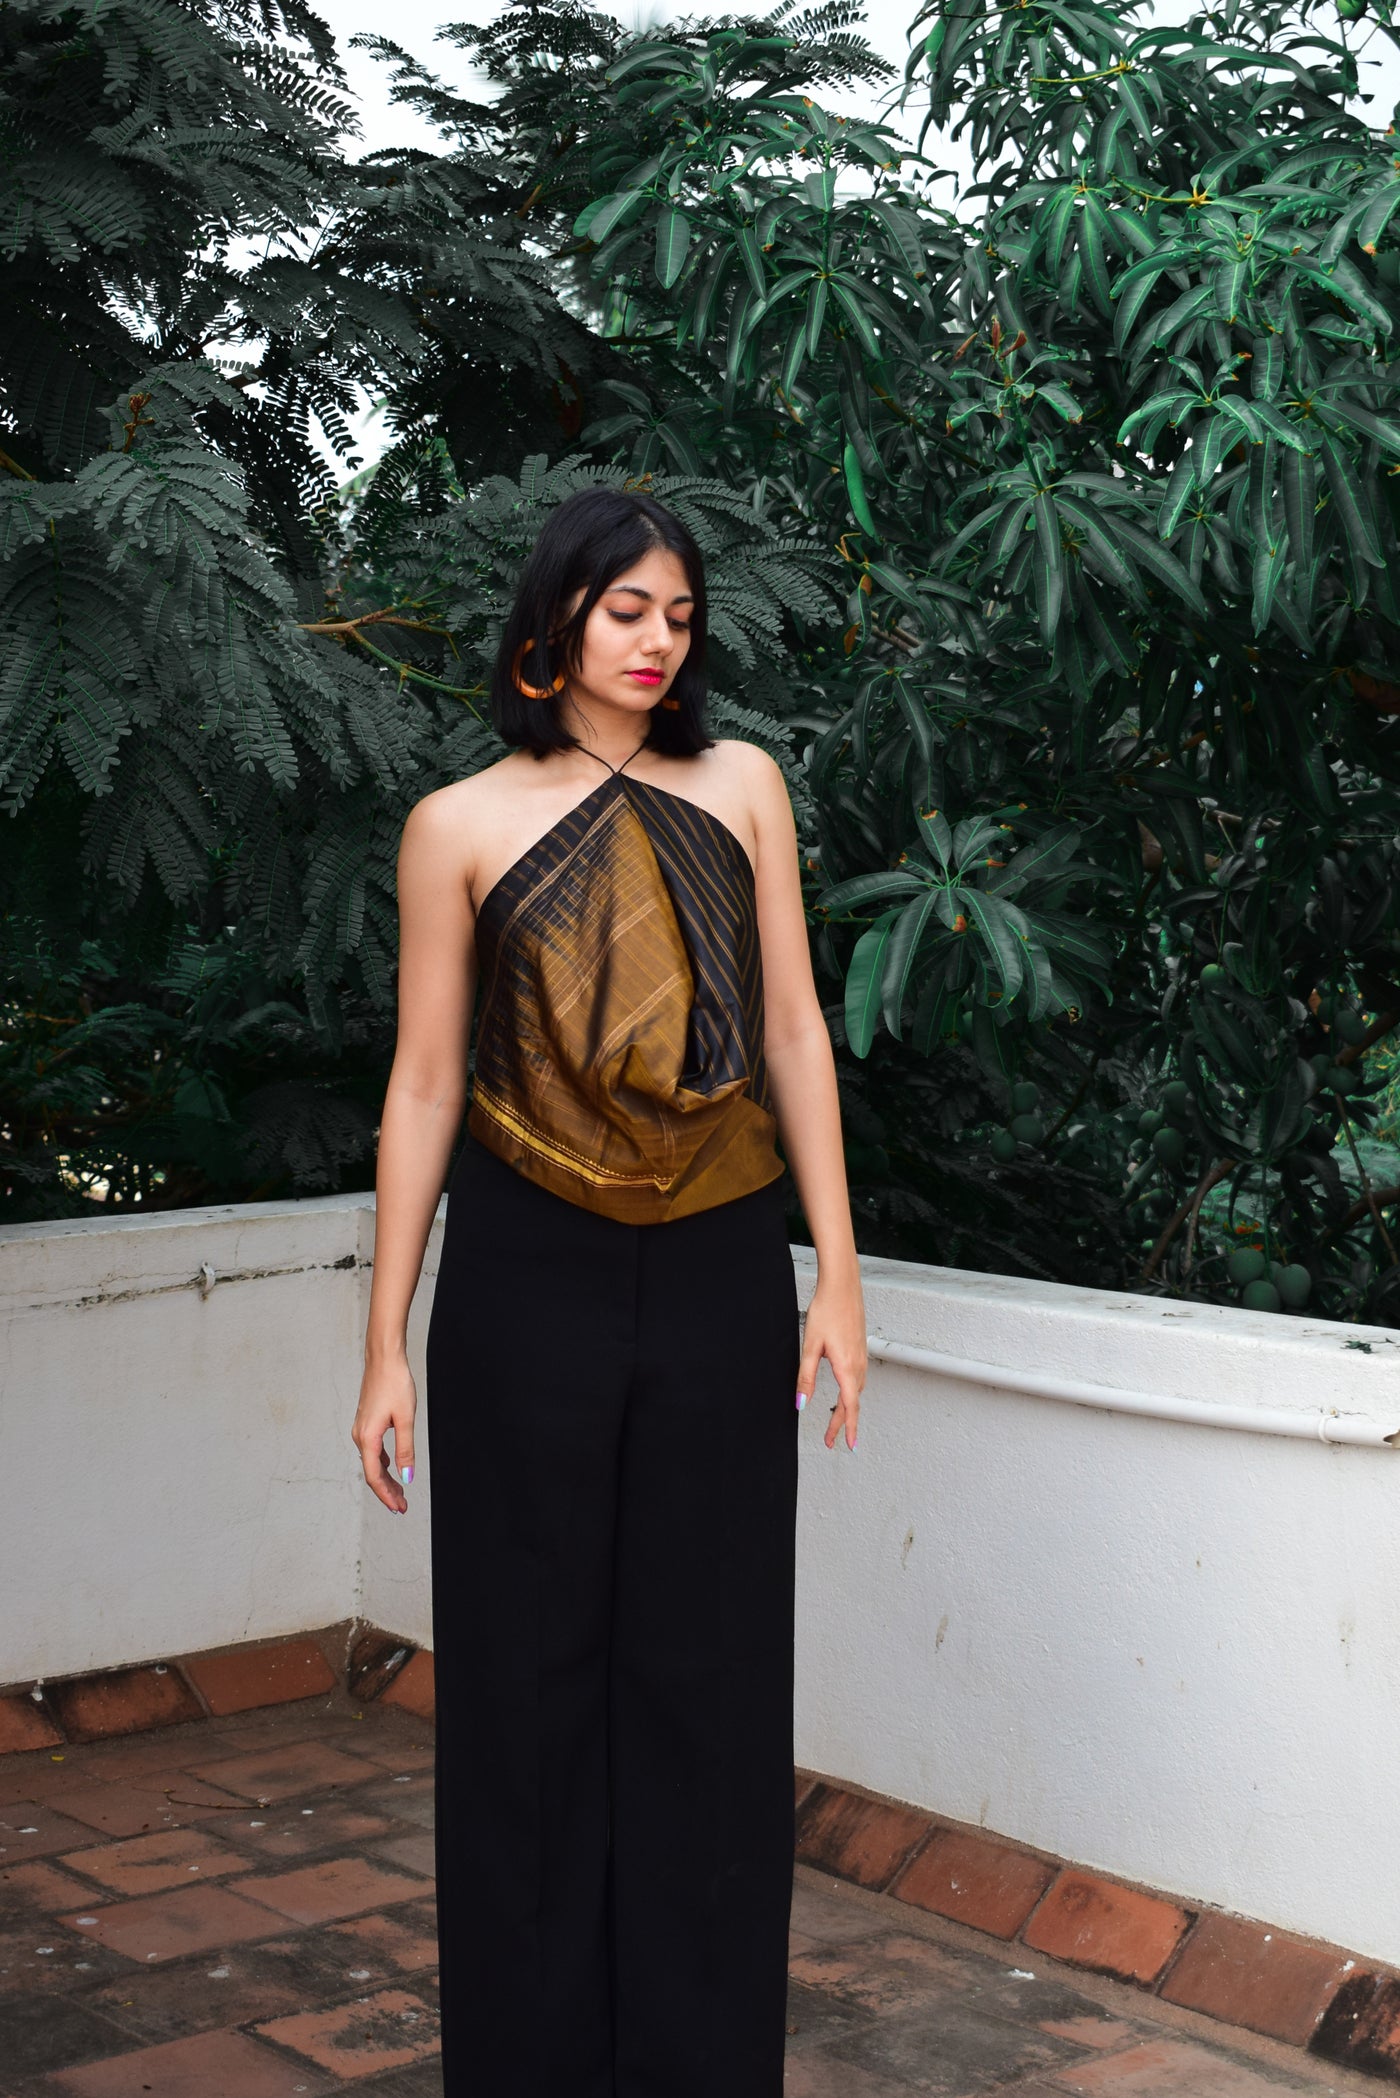 A halter neck top in dull gold and black featuring pleated detailing